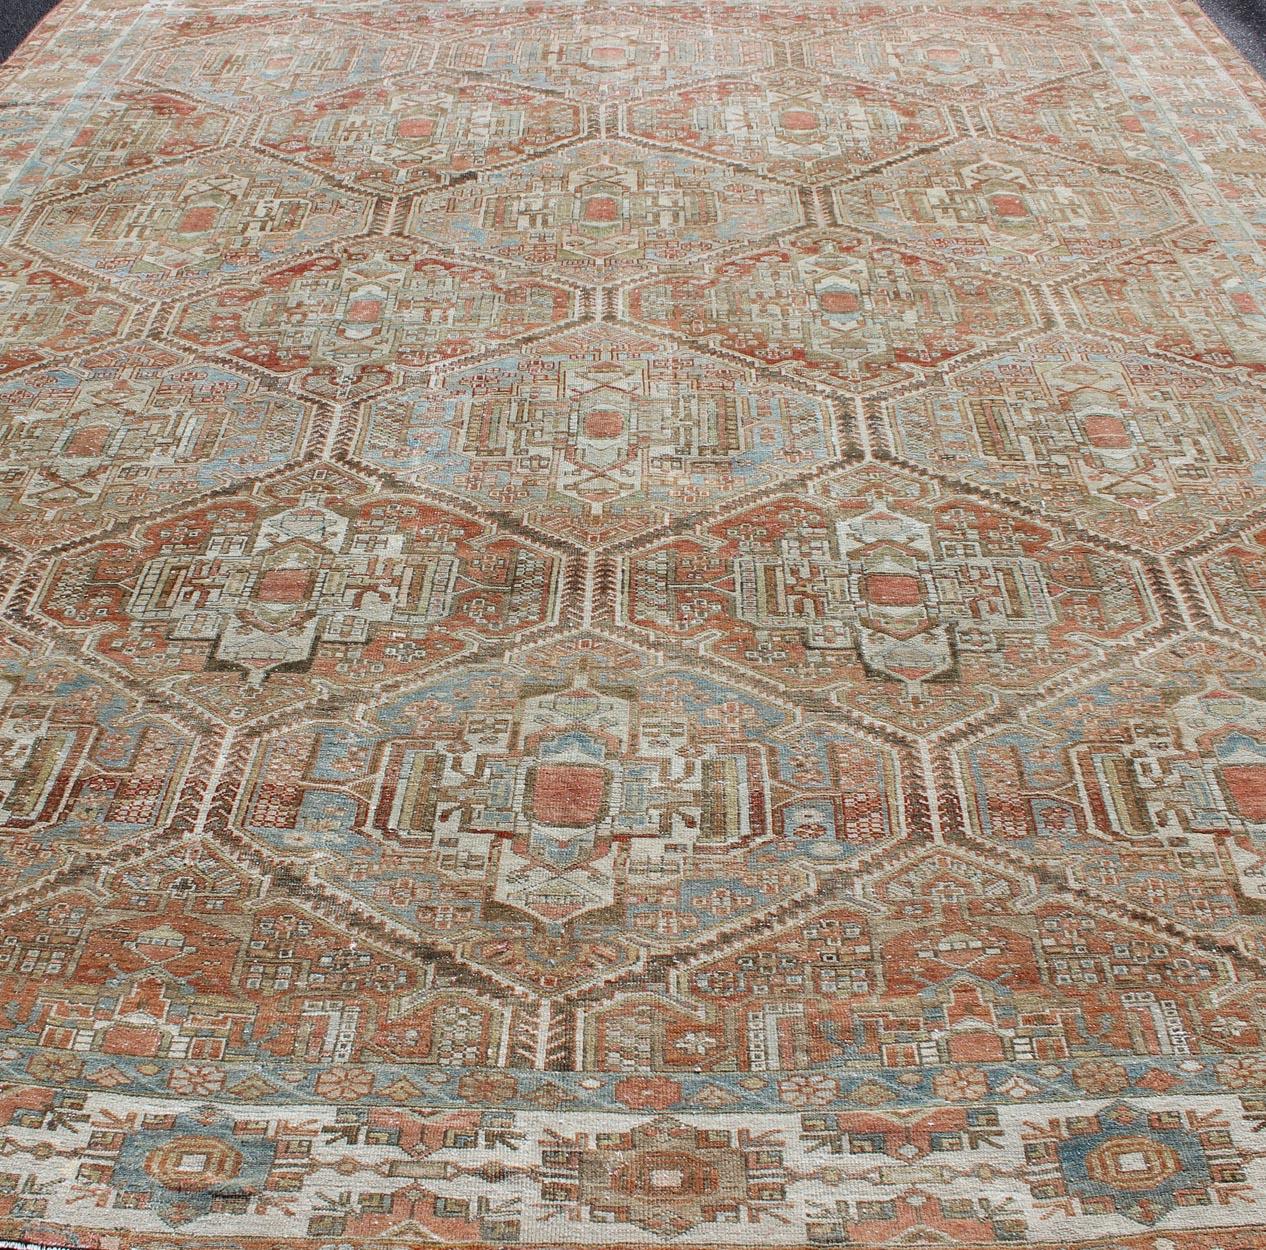 Early 20th Century Large Antique Persian Over Sized Diamond Design Bakhtiari Rug in Multi Colors For Sale